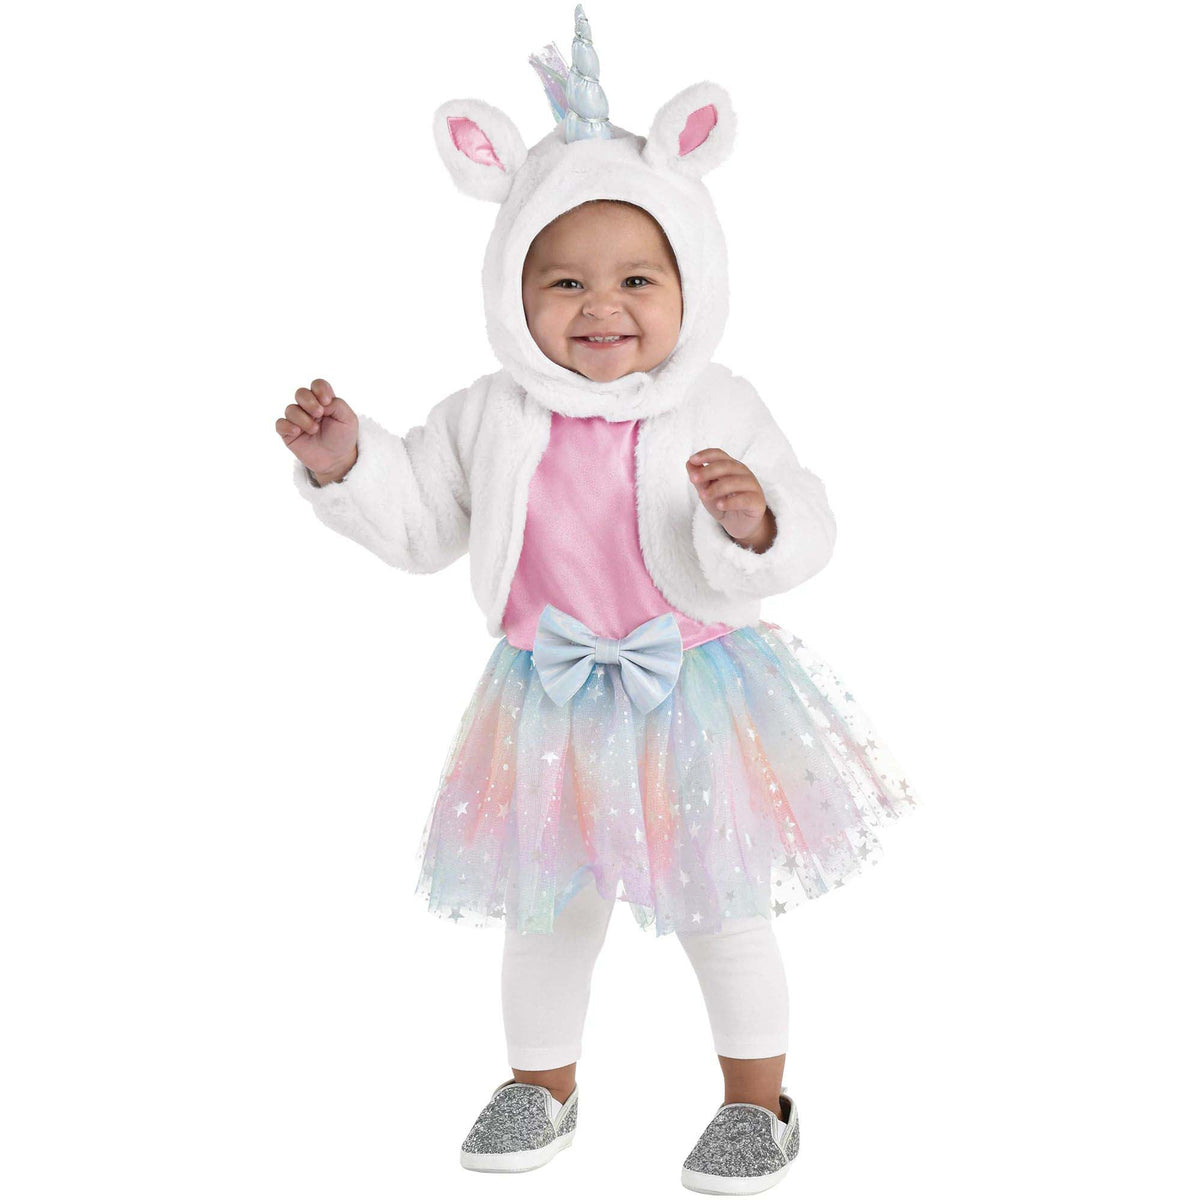 HALLOWEEN COSTUME CO. Costumes Magical Tutu Unicorn Costume for Babies and Toddlers, Pink Dress